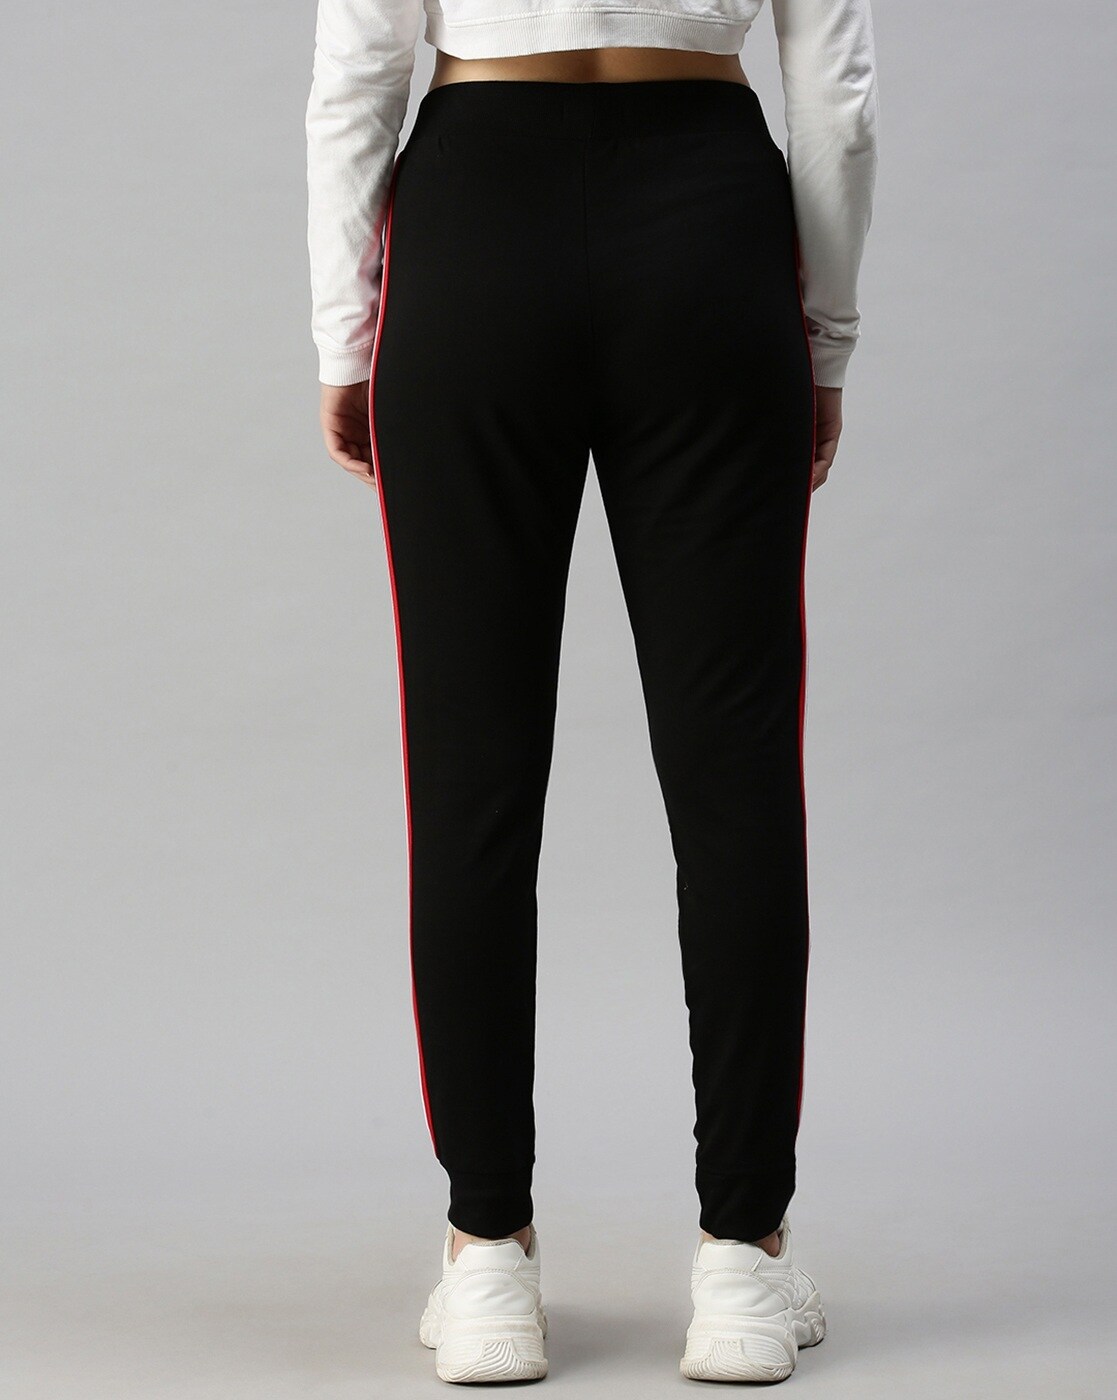 Crop Sweatshirt And Joggers Tracksuit | Tracksuit women, Track pants women,  Crop sweatshirt